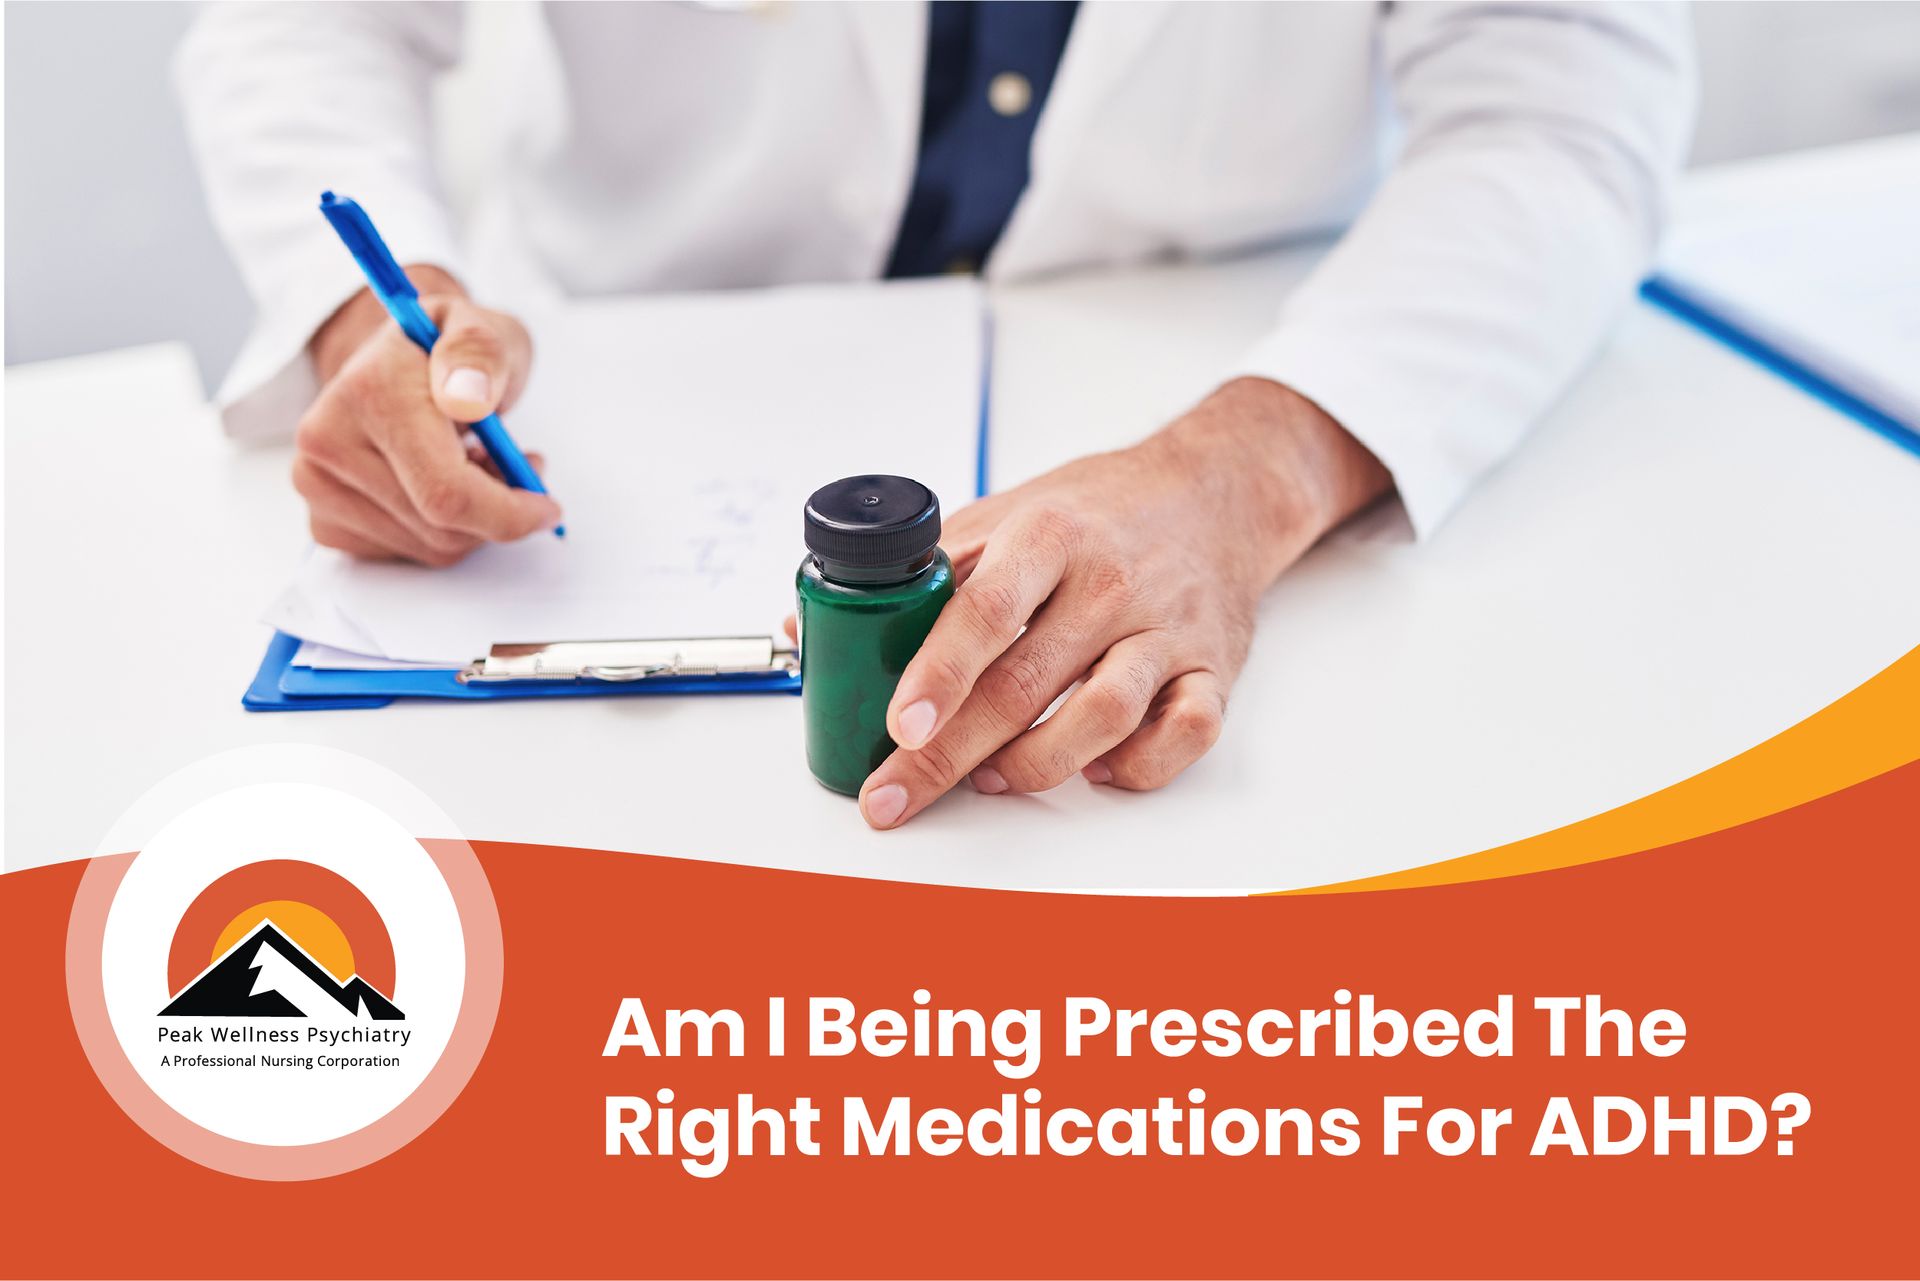 Am I Being Prescribed the Right Medications For ADHD?